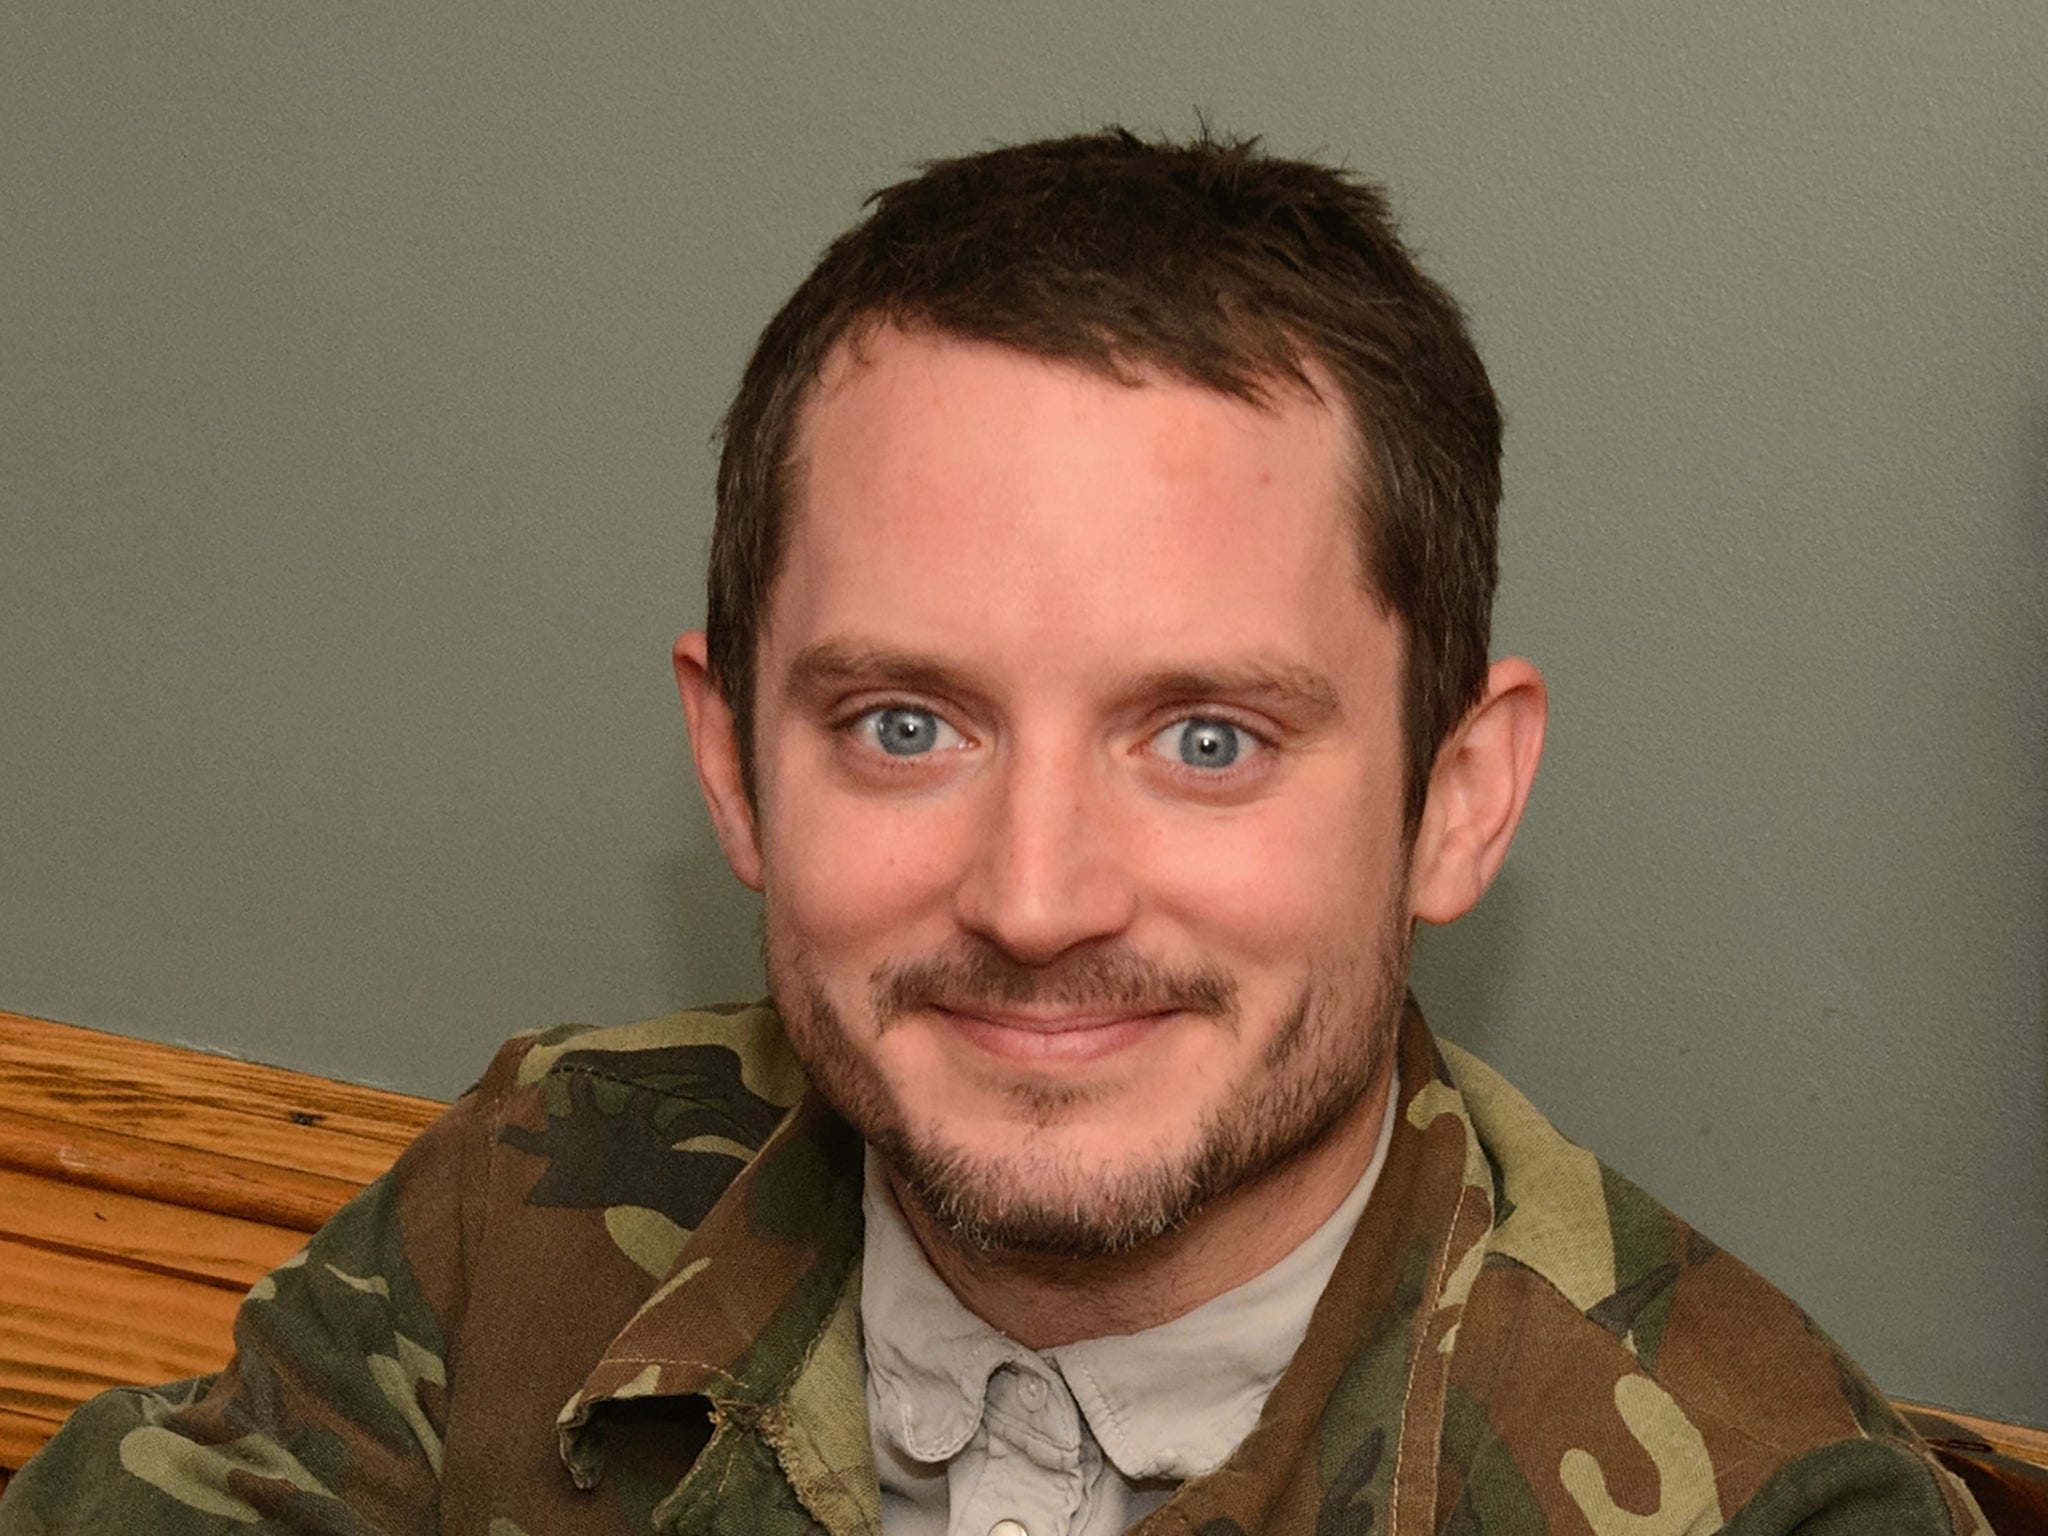 Elijah Wood: ‘If you don’t have a stable home life, then you’re suddenly defining yourself by what everyone else tells you you are’